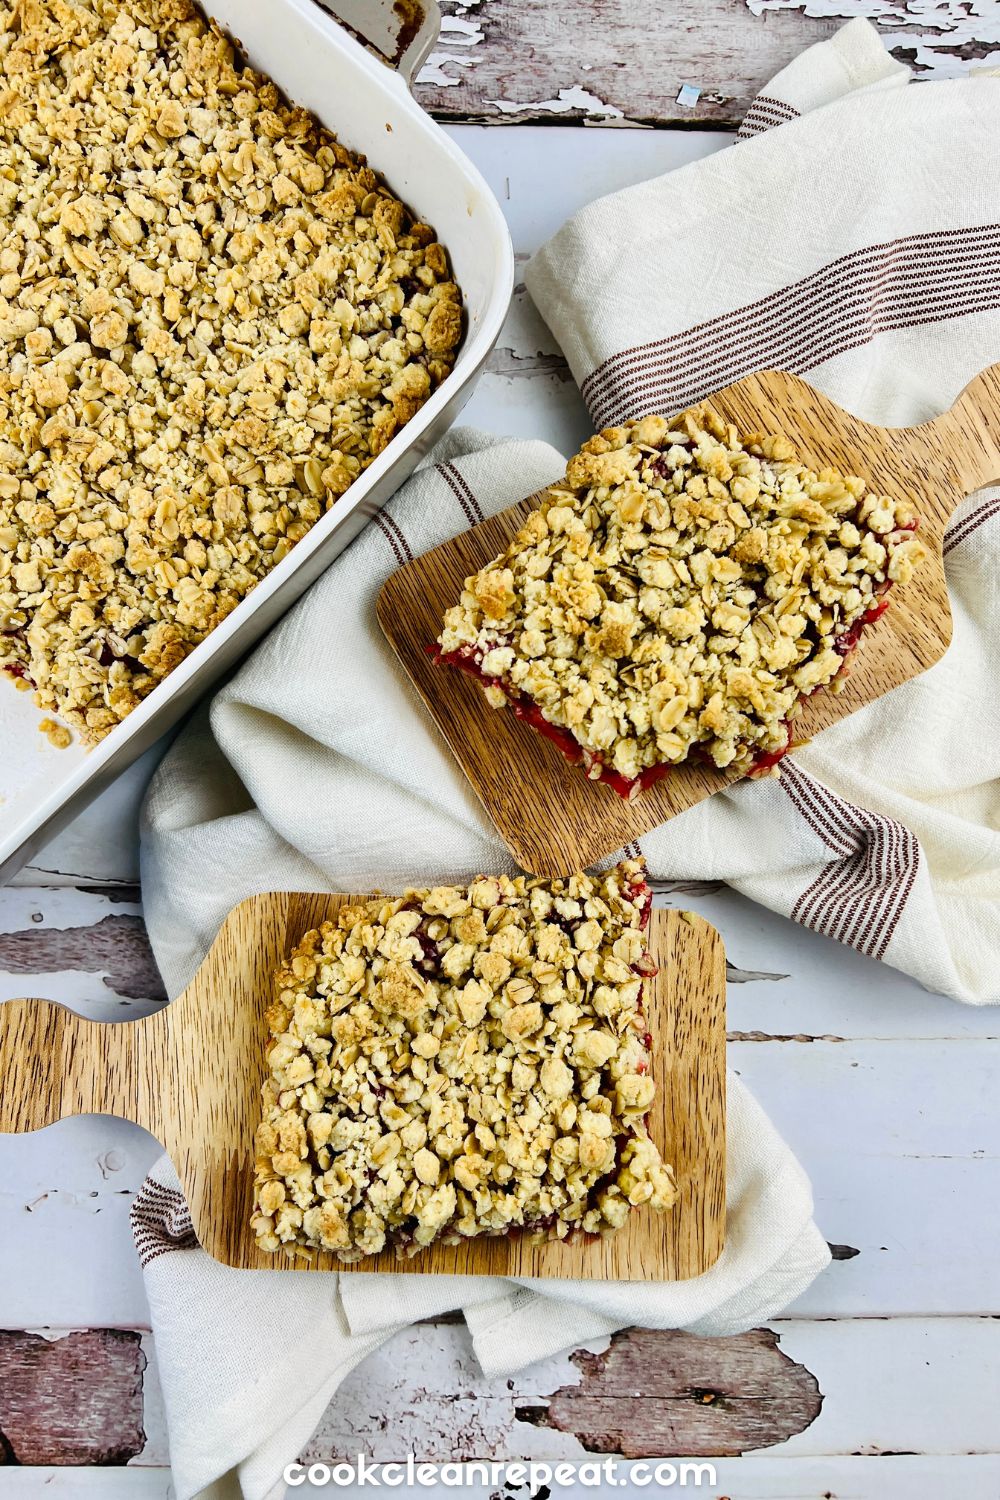 two slices of cherry bars on a table beside the baking dish